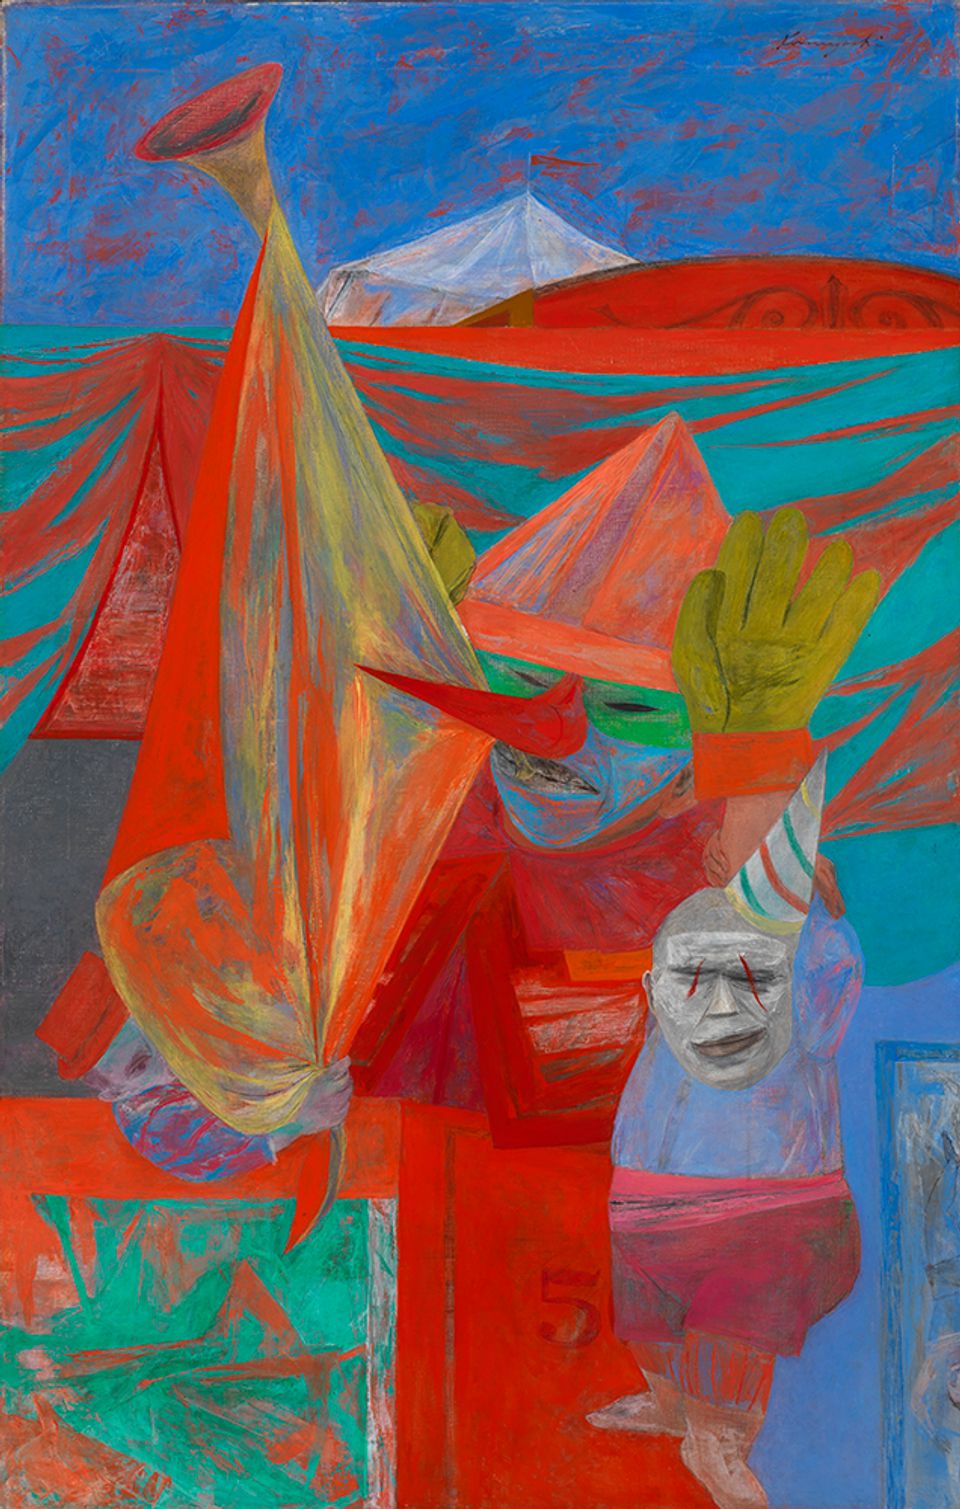 A colorful painting of two clown figures.